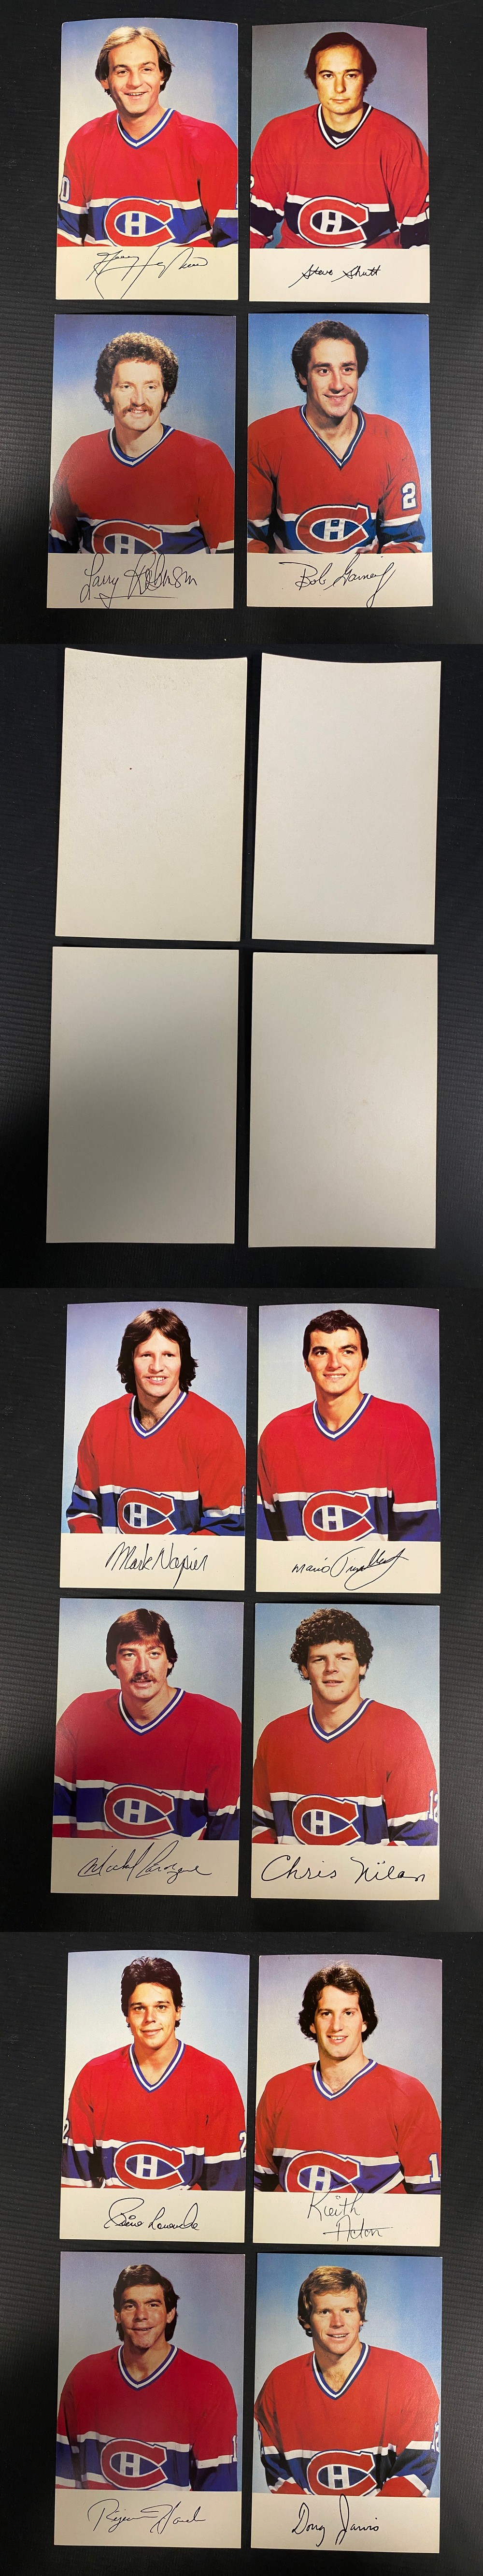 1980-81 MONTREAL CANADIENS TEAM POST CARD FULL SET 26/26 photo